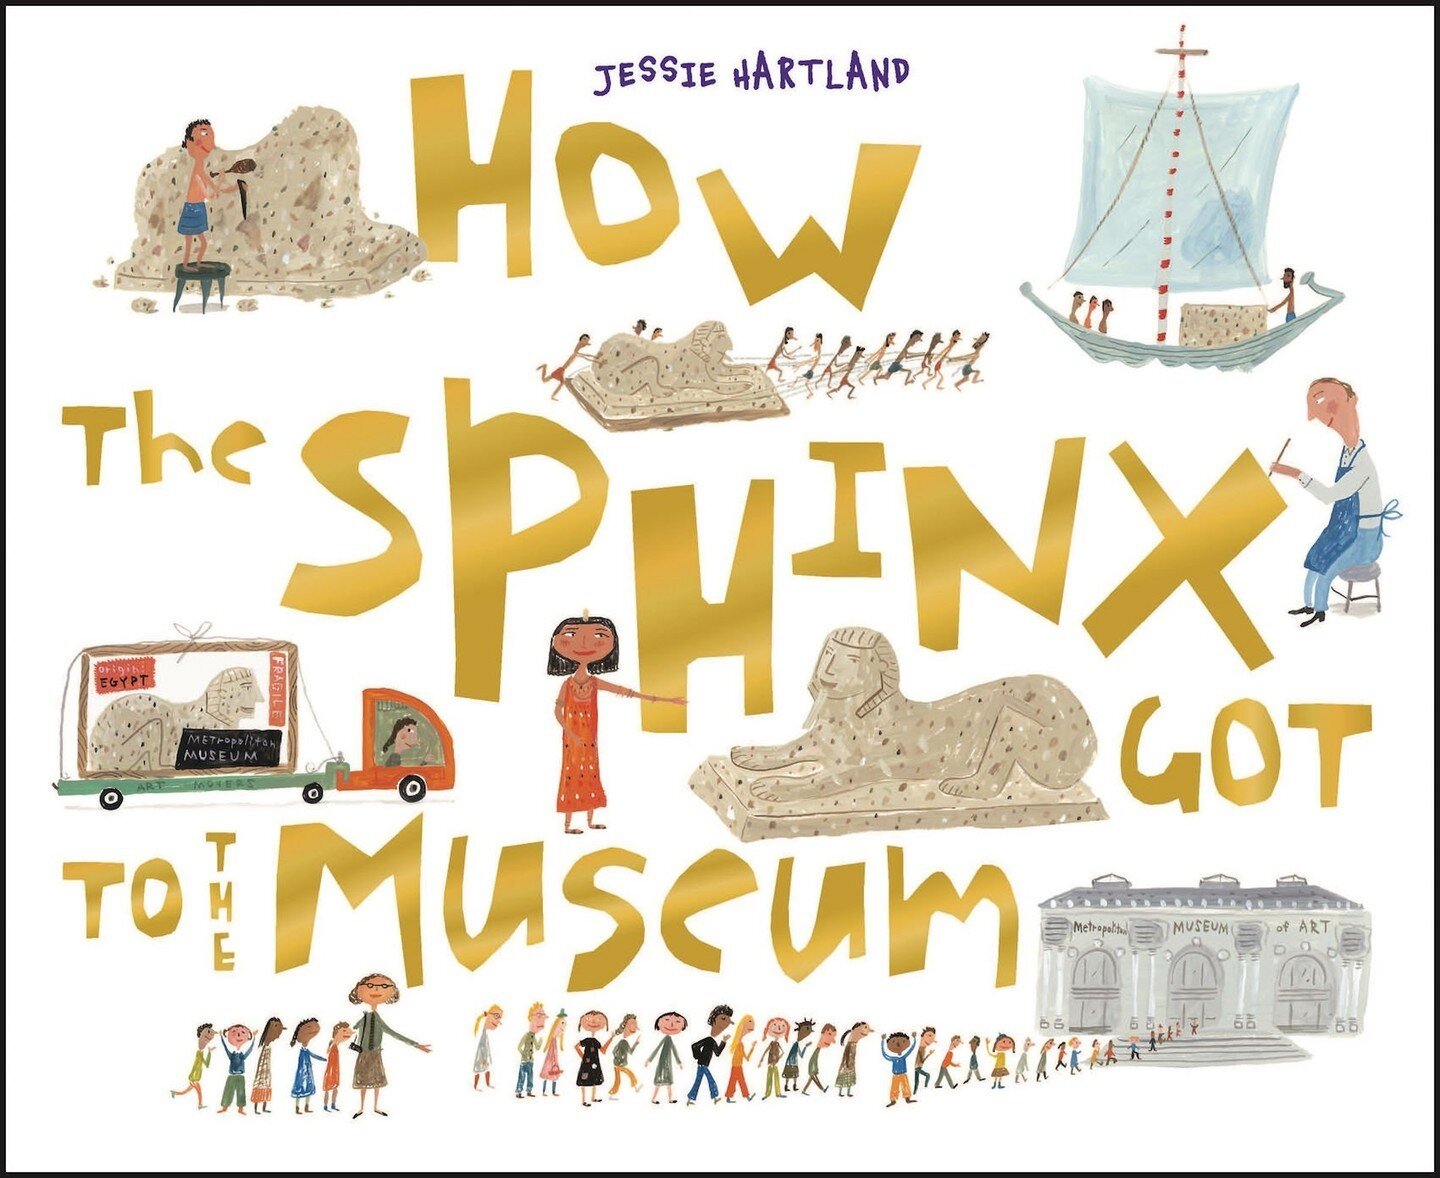 As a child, my mother would take my sister and me to museums, including the Met.  I remember being awestruck by much of what I saw, but especially the giant Sphinx.  I just discovered this book by Jessie Hartland, titled How The Sphinx Got To The Mus